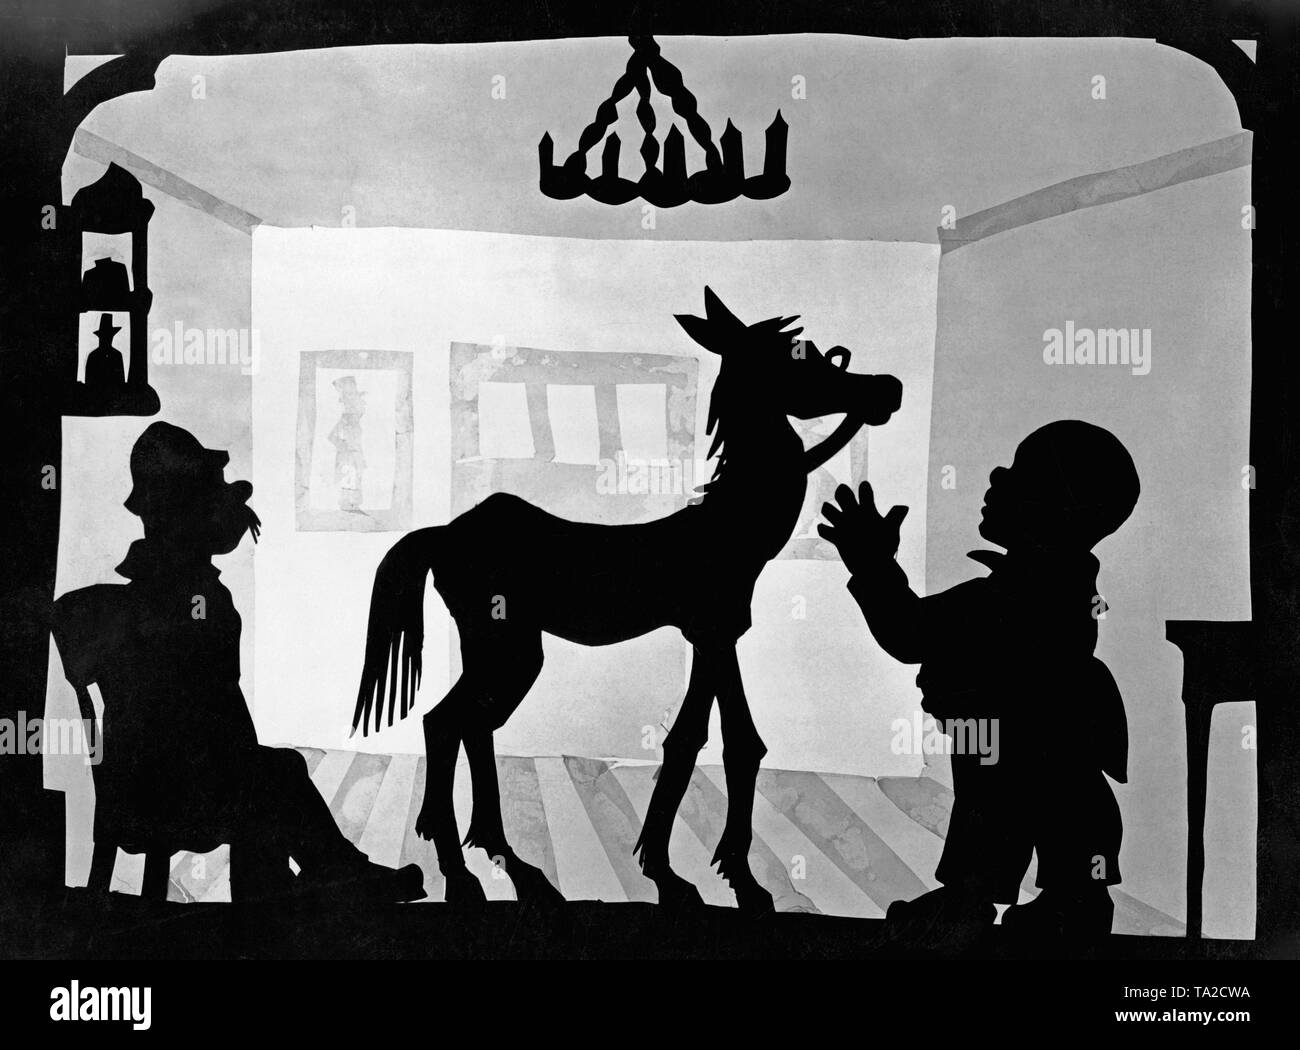 This photo shows a scene from the silhouette film 'Dr. Dolittle and His Animals' - subtitle: 'Das kranke Pferd' by Charlotte Reiniger. The silhouette film, also known as silhouette animation, is a technique of animated film in which silhouettes are put together on a lighted glass plate in front of a white or black background to form a film. The result is the silhouette film, inspired by shadow theater and the pictorial techniques of silhouette cutting. Stock Photo